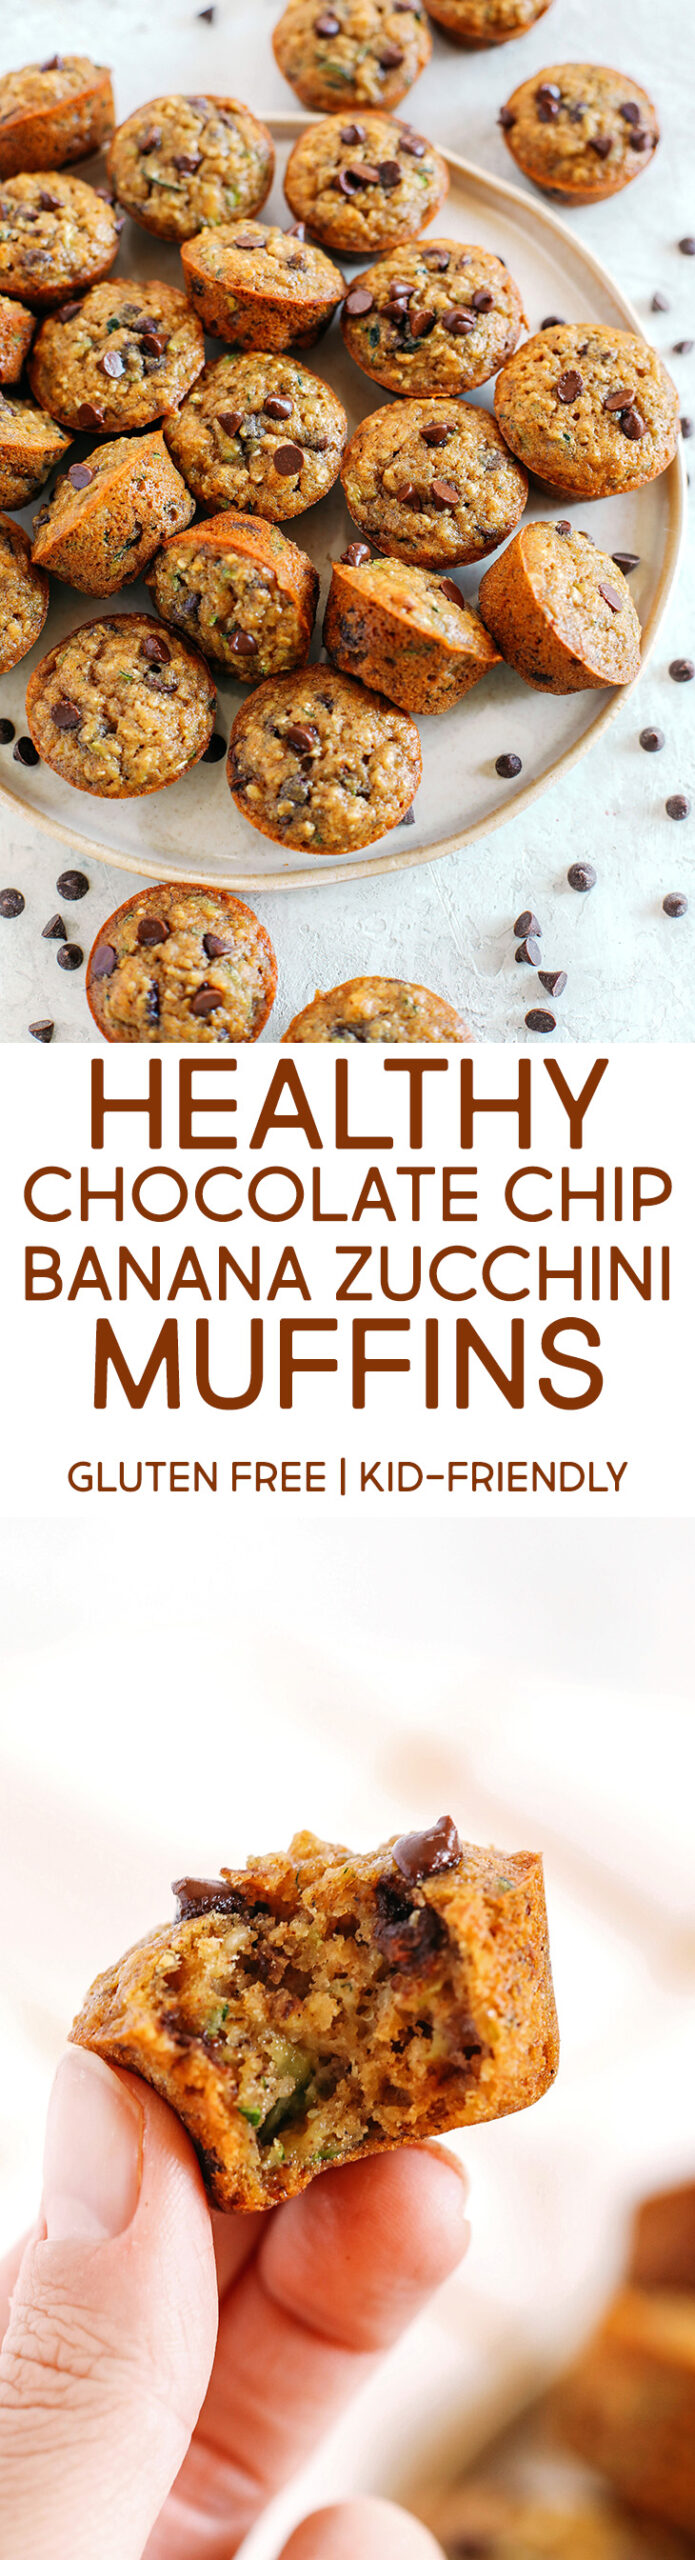 Healthy bite-sized Chocolate Chip Banana Zucchini Muffins that are moist and delicious with hidden veggies and naturally sweetened with banana and honey!